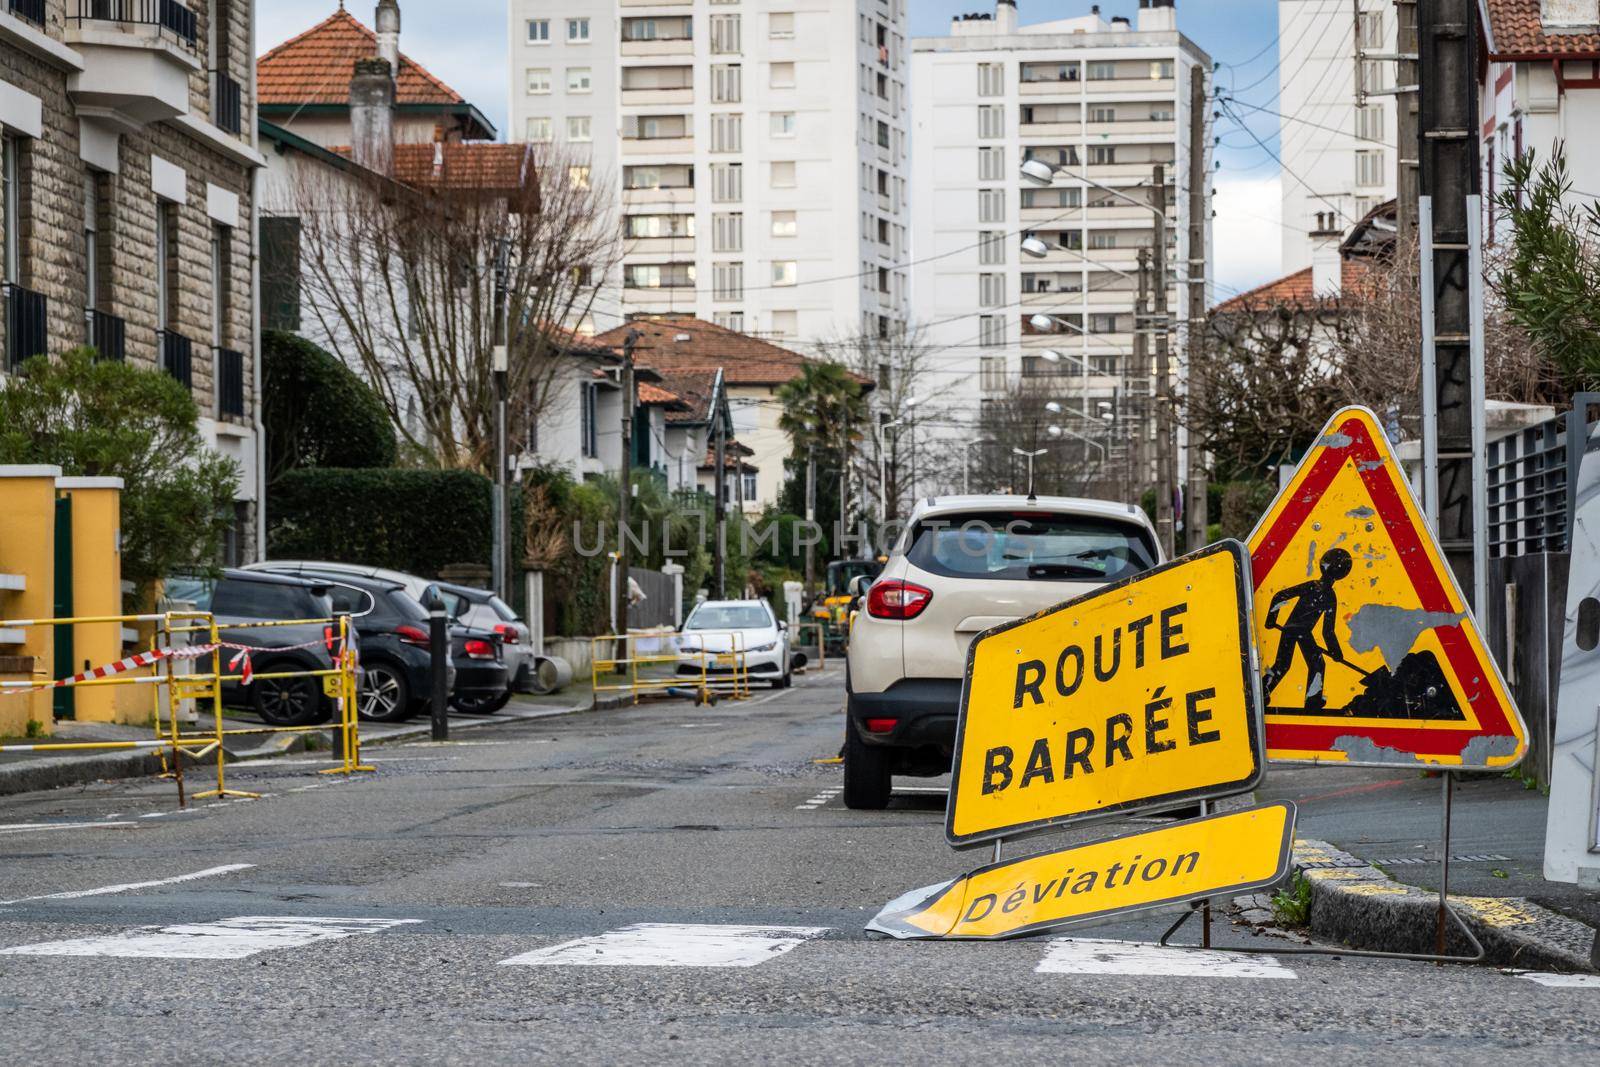 Road closed and diversion signs in French town by dutourdumonde